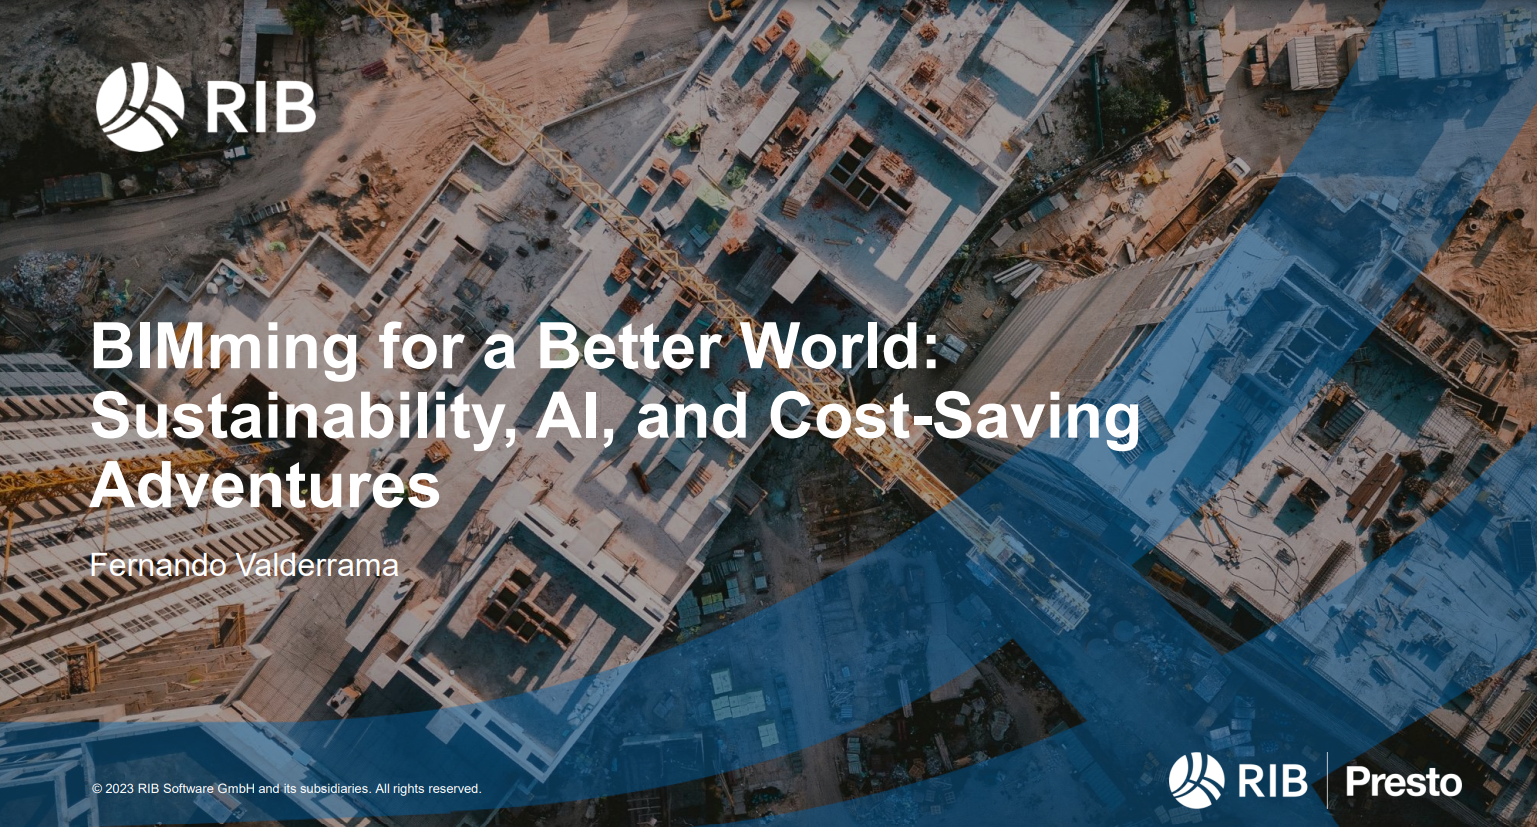 BIMming for a Better World: Sustainability, AI, and Cost-Saving Adventures